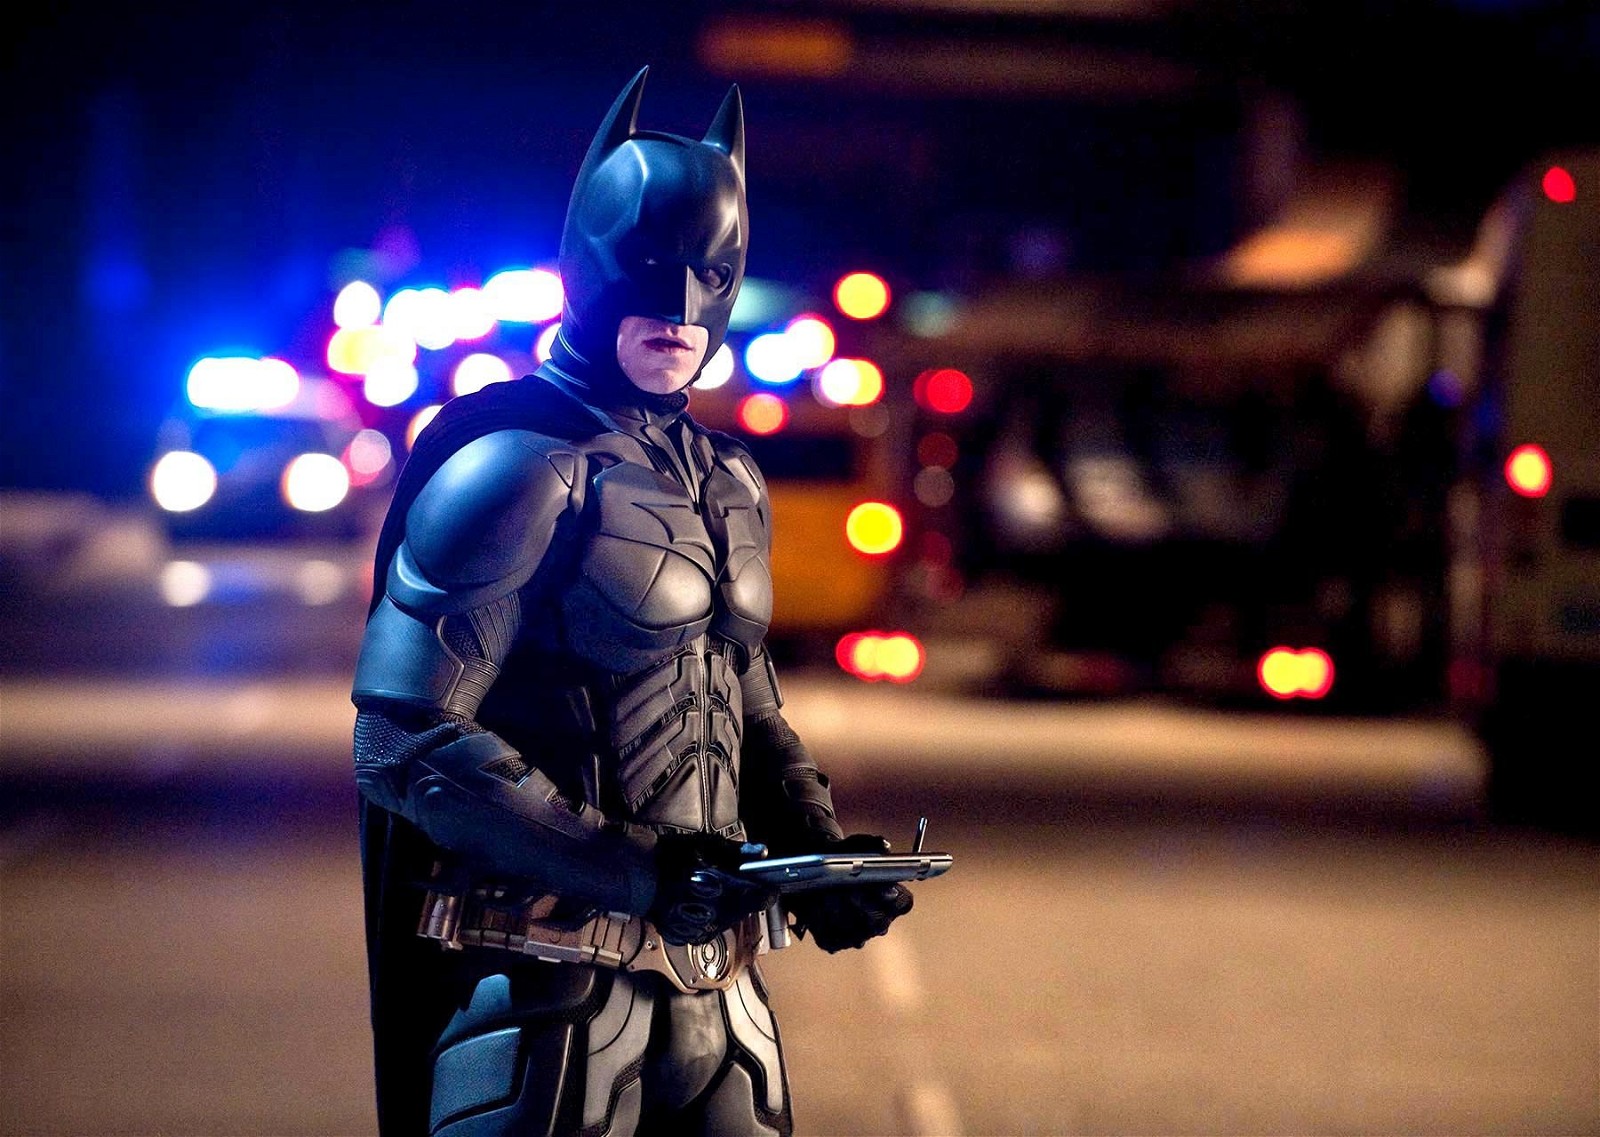 The Dark Knight Rises was delayed due to Jonathan Nolan's involvement with Fallout 3